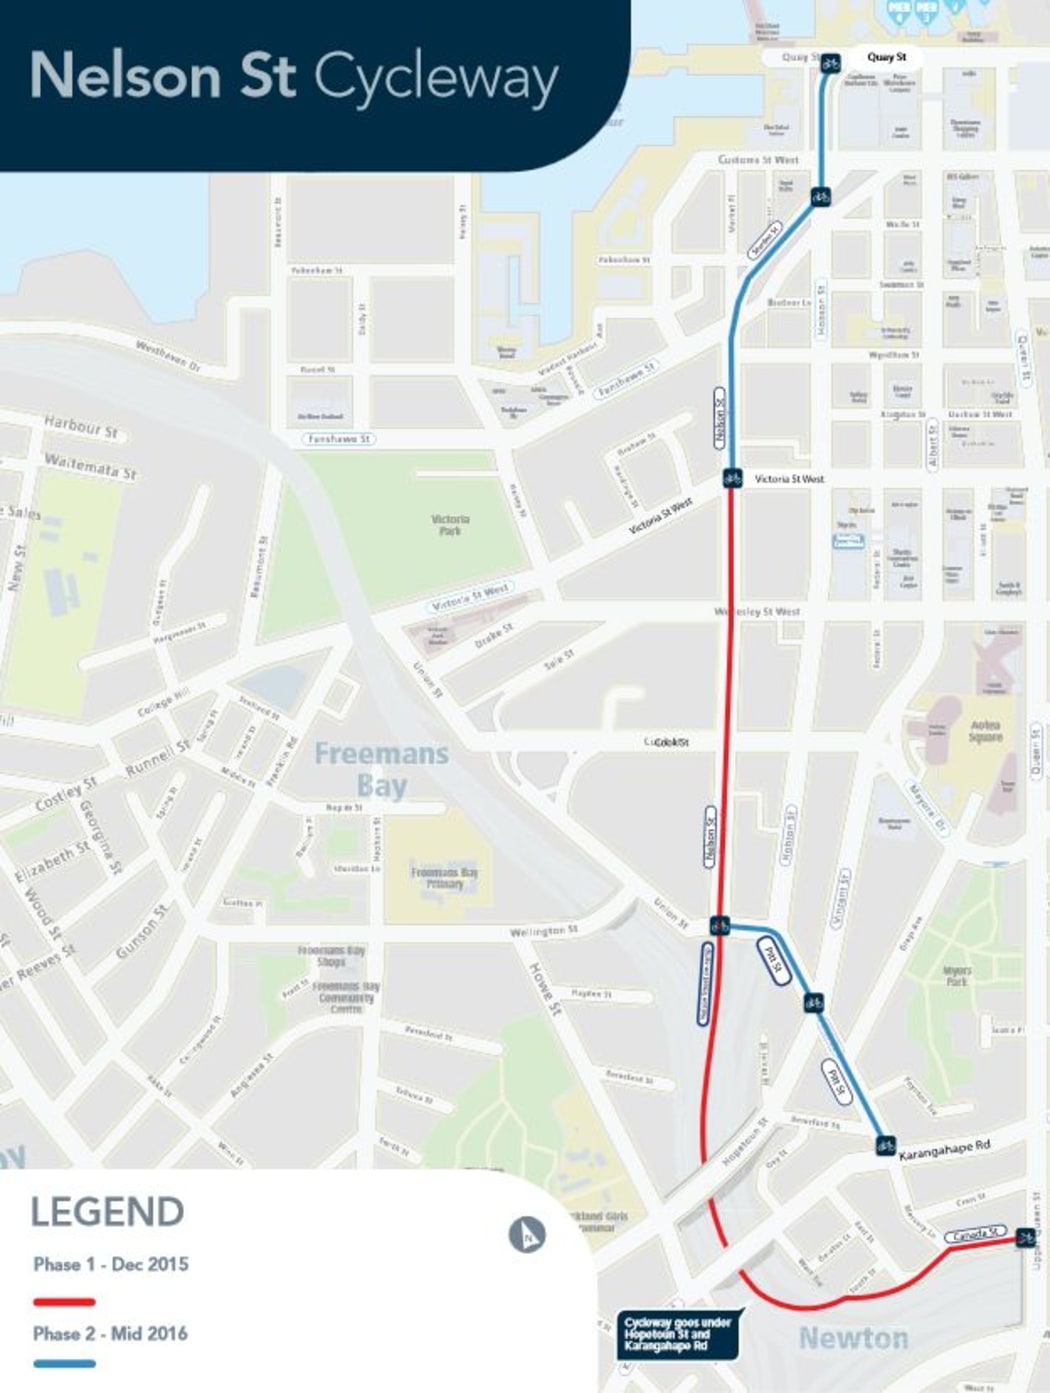 A map shows the Nelson Street Cycleway's planned route from Upper Queen Street to the waterfront.